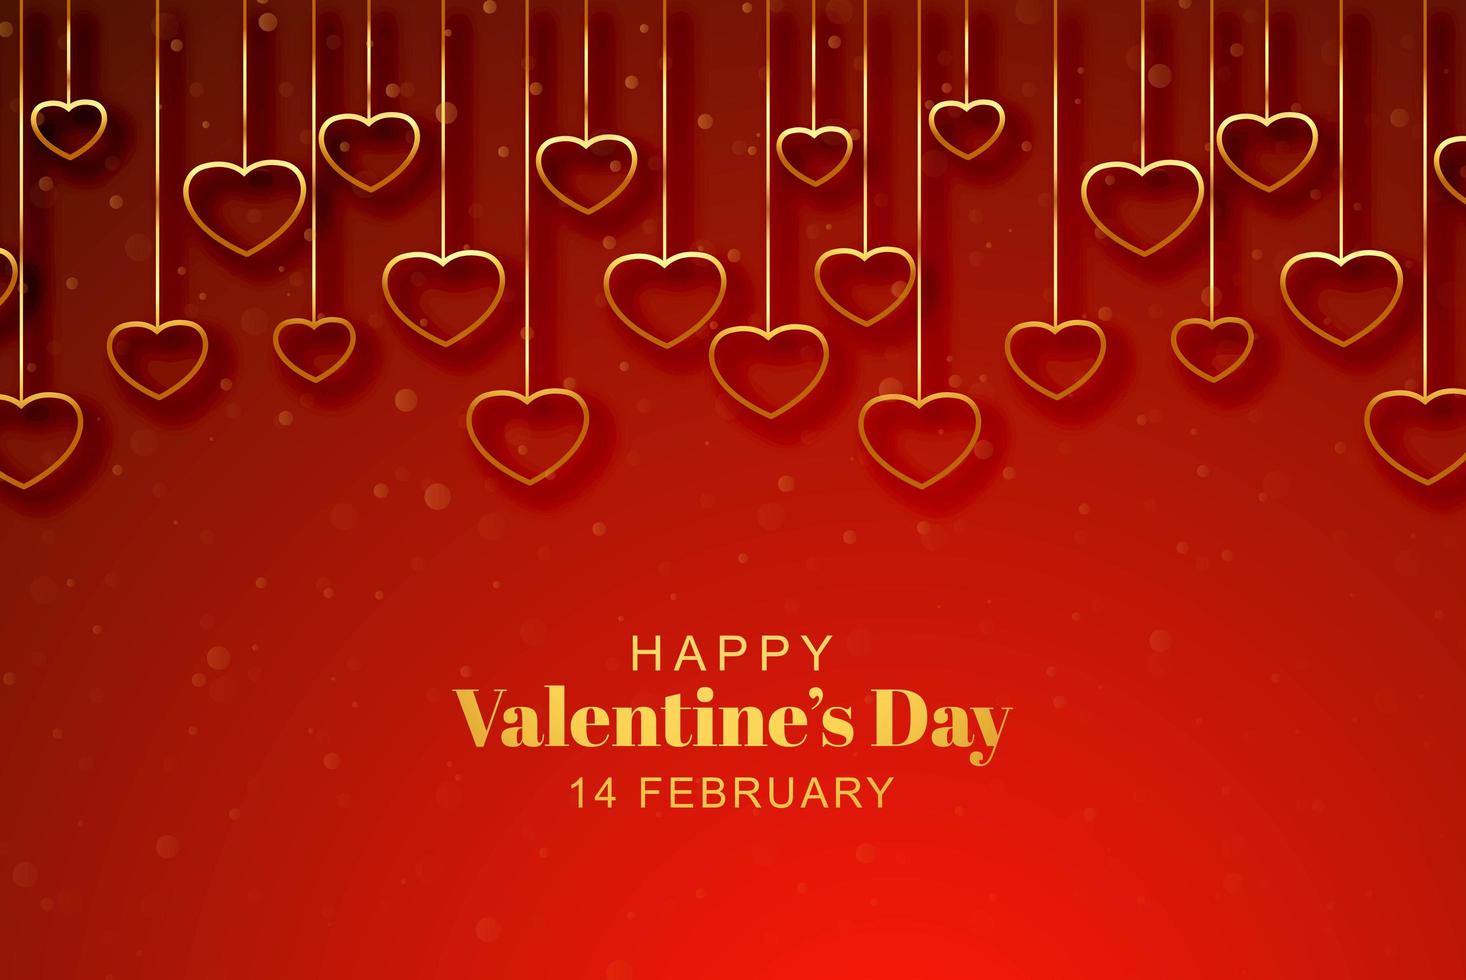 Golden hanging hearts on red valentines day background vector